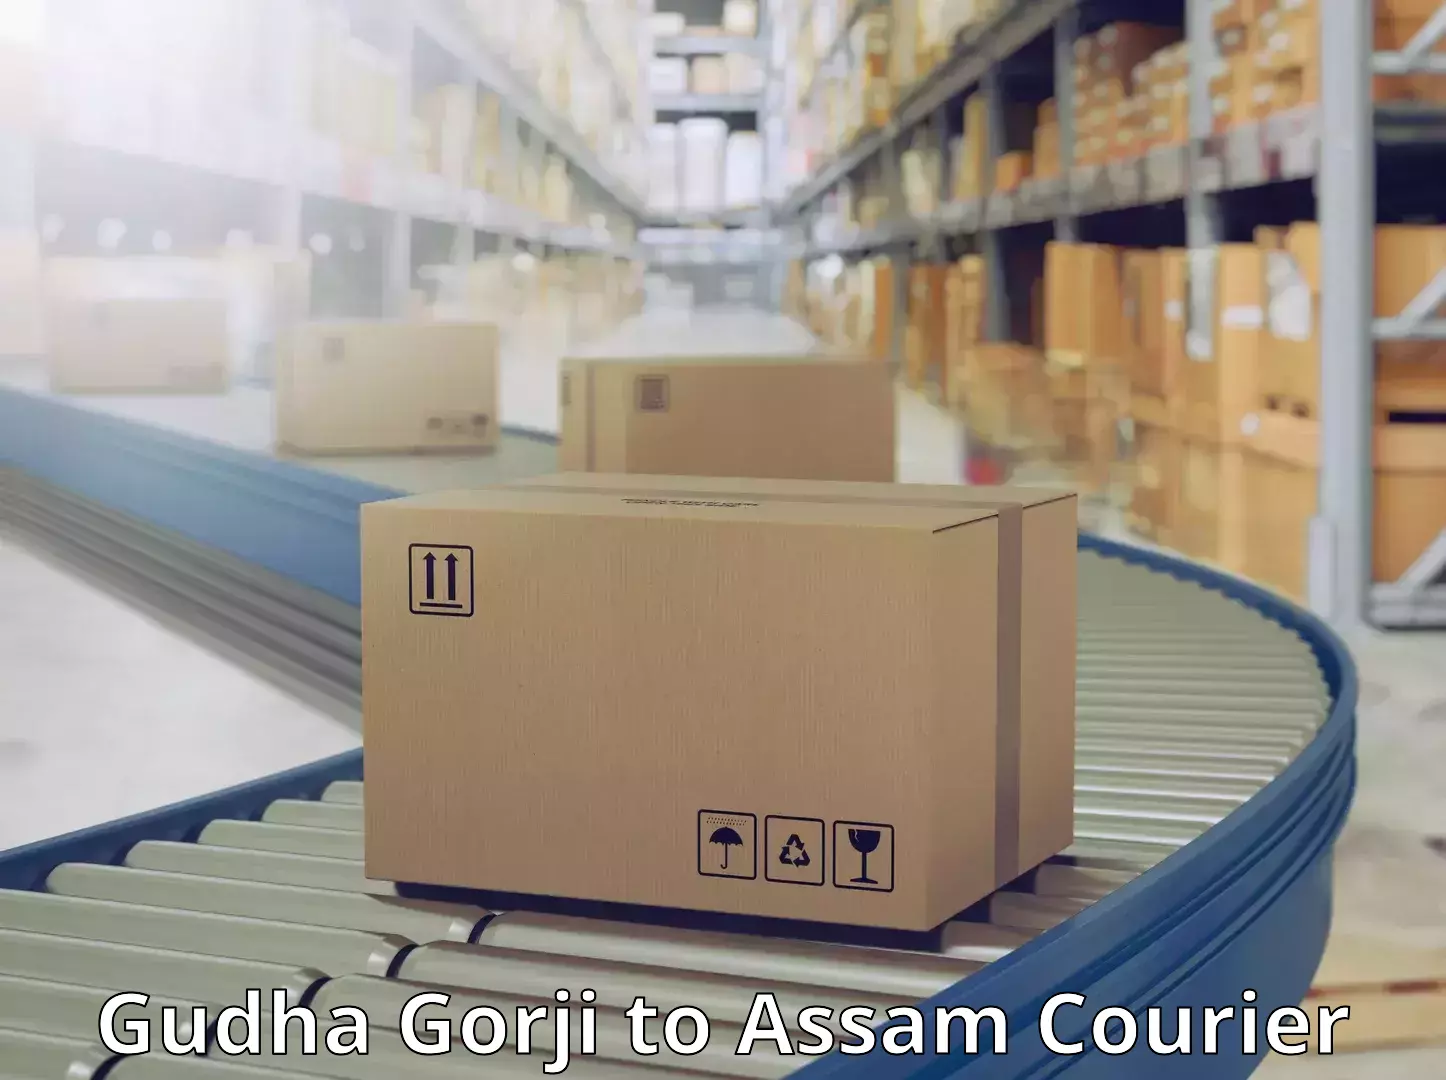 State-of-the-art courier technology Gudha Gorji to Assam